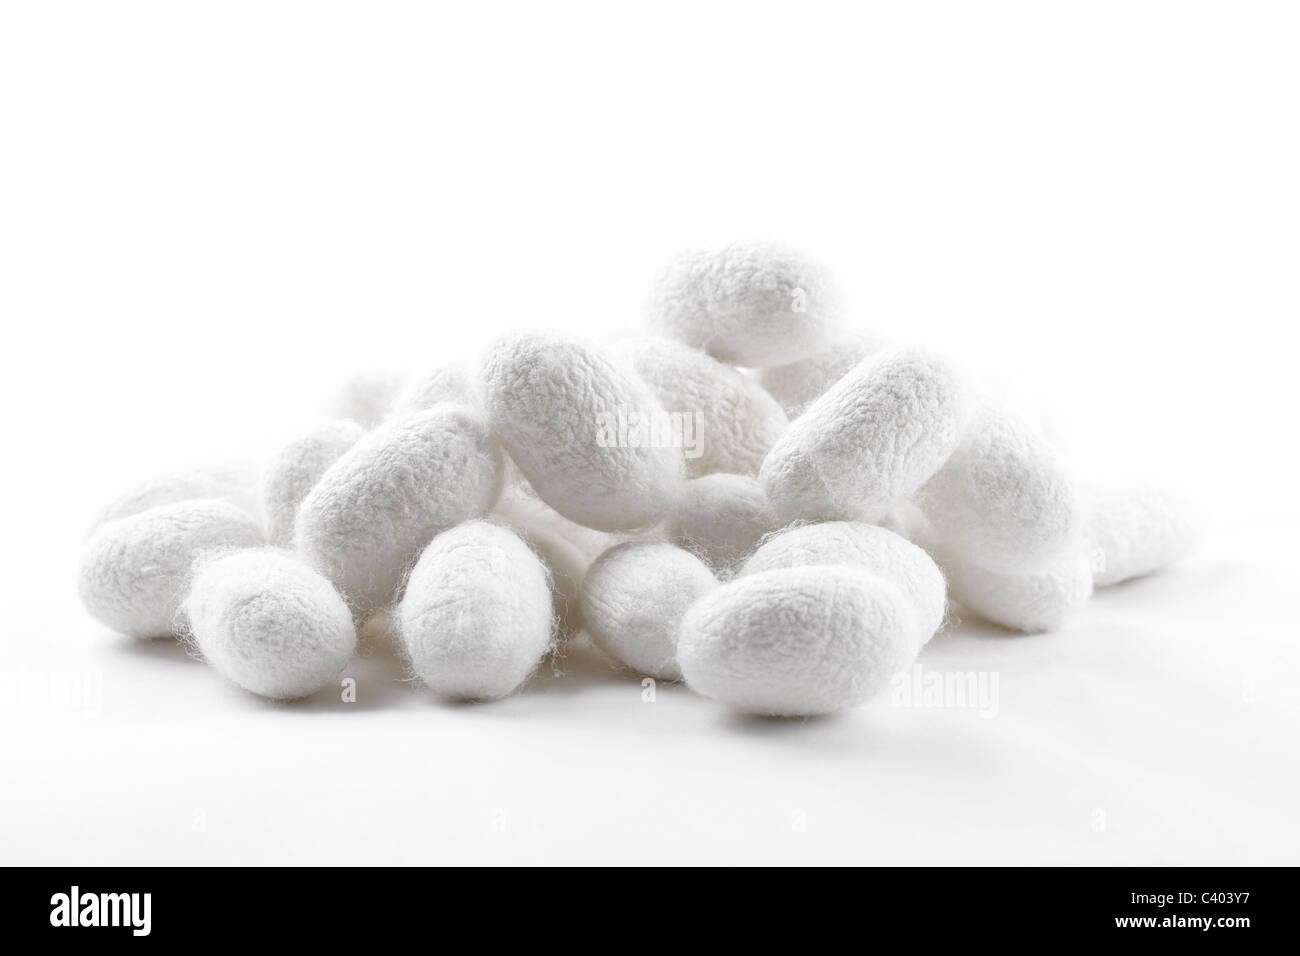 Closeup of silk cocoons on white background. Stock Photo